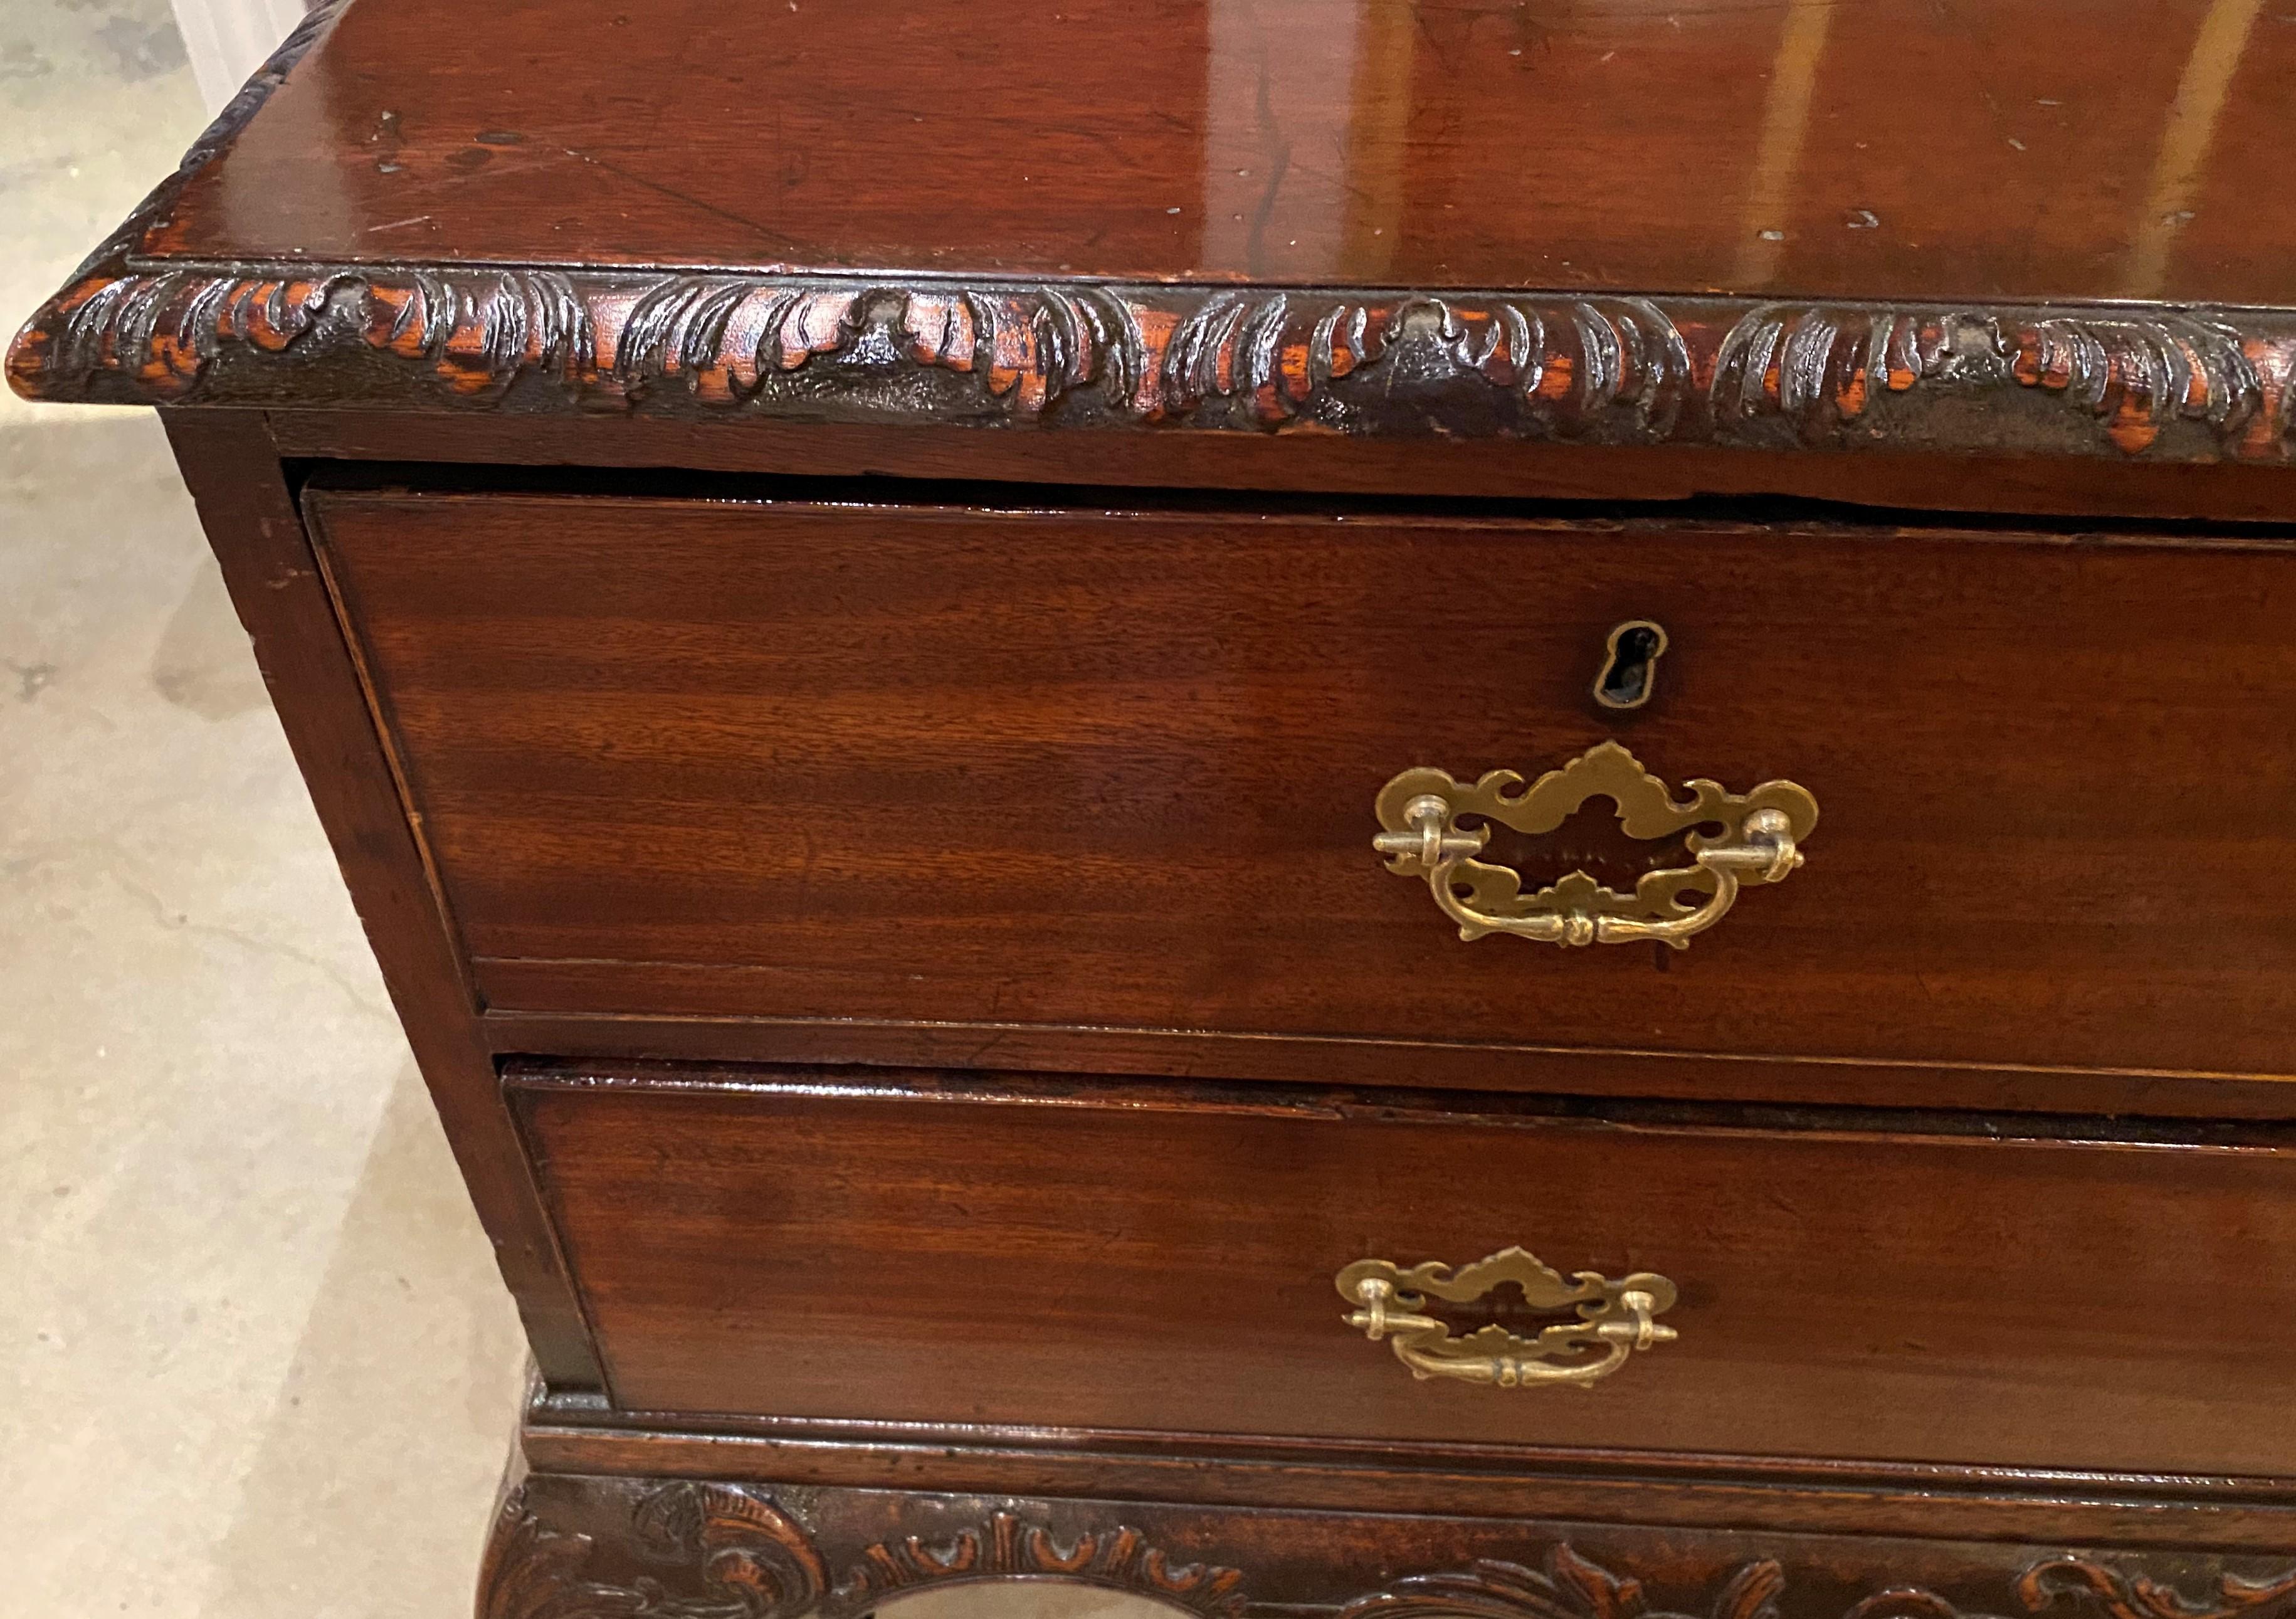 Magnificently Carved 18th Century English Mahogany Commode In Good Condition For Sale In Milford, NH